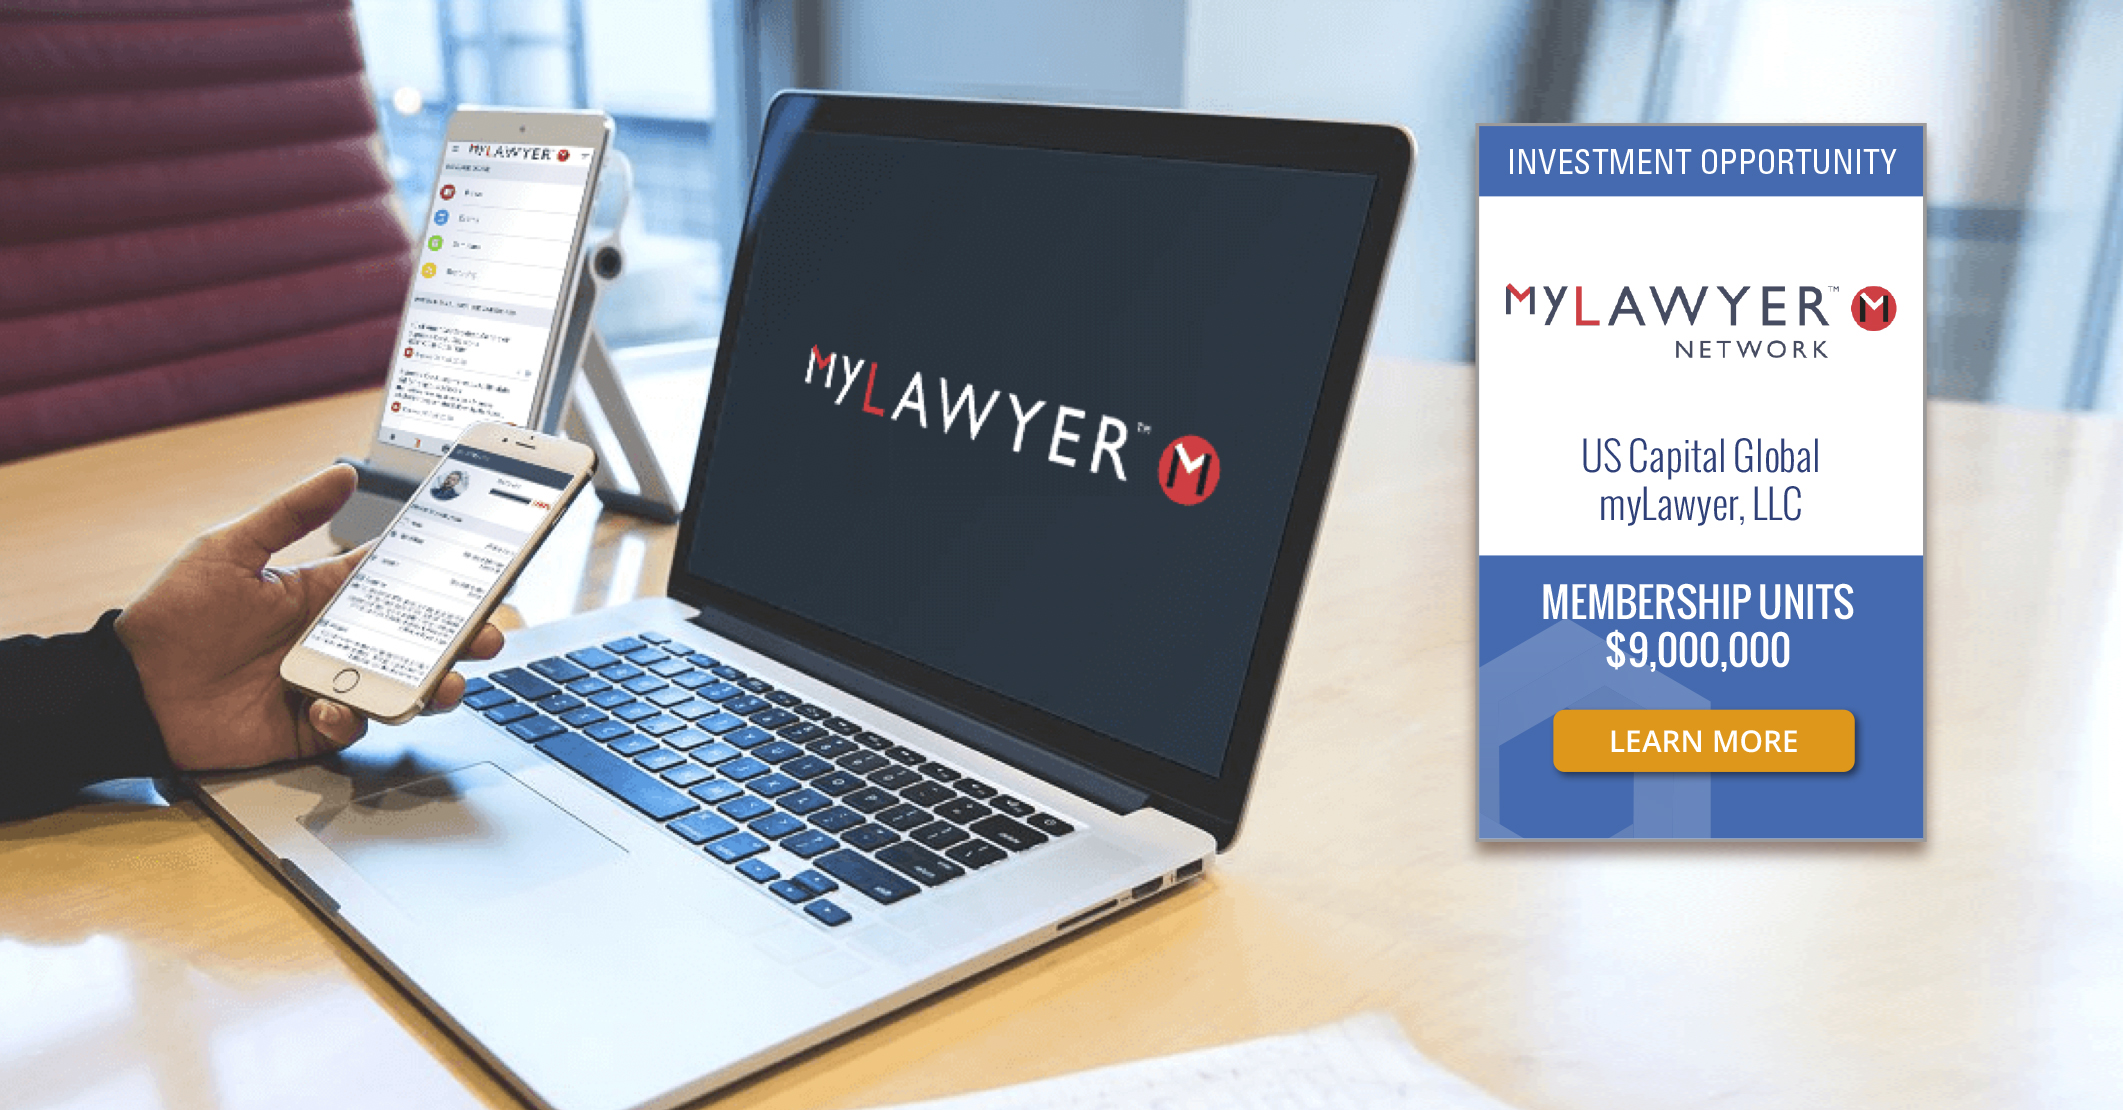 Laptop with myLawyer on screen and investment offer; image courtesy of US Capital Global Securities LLC.